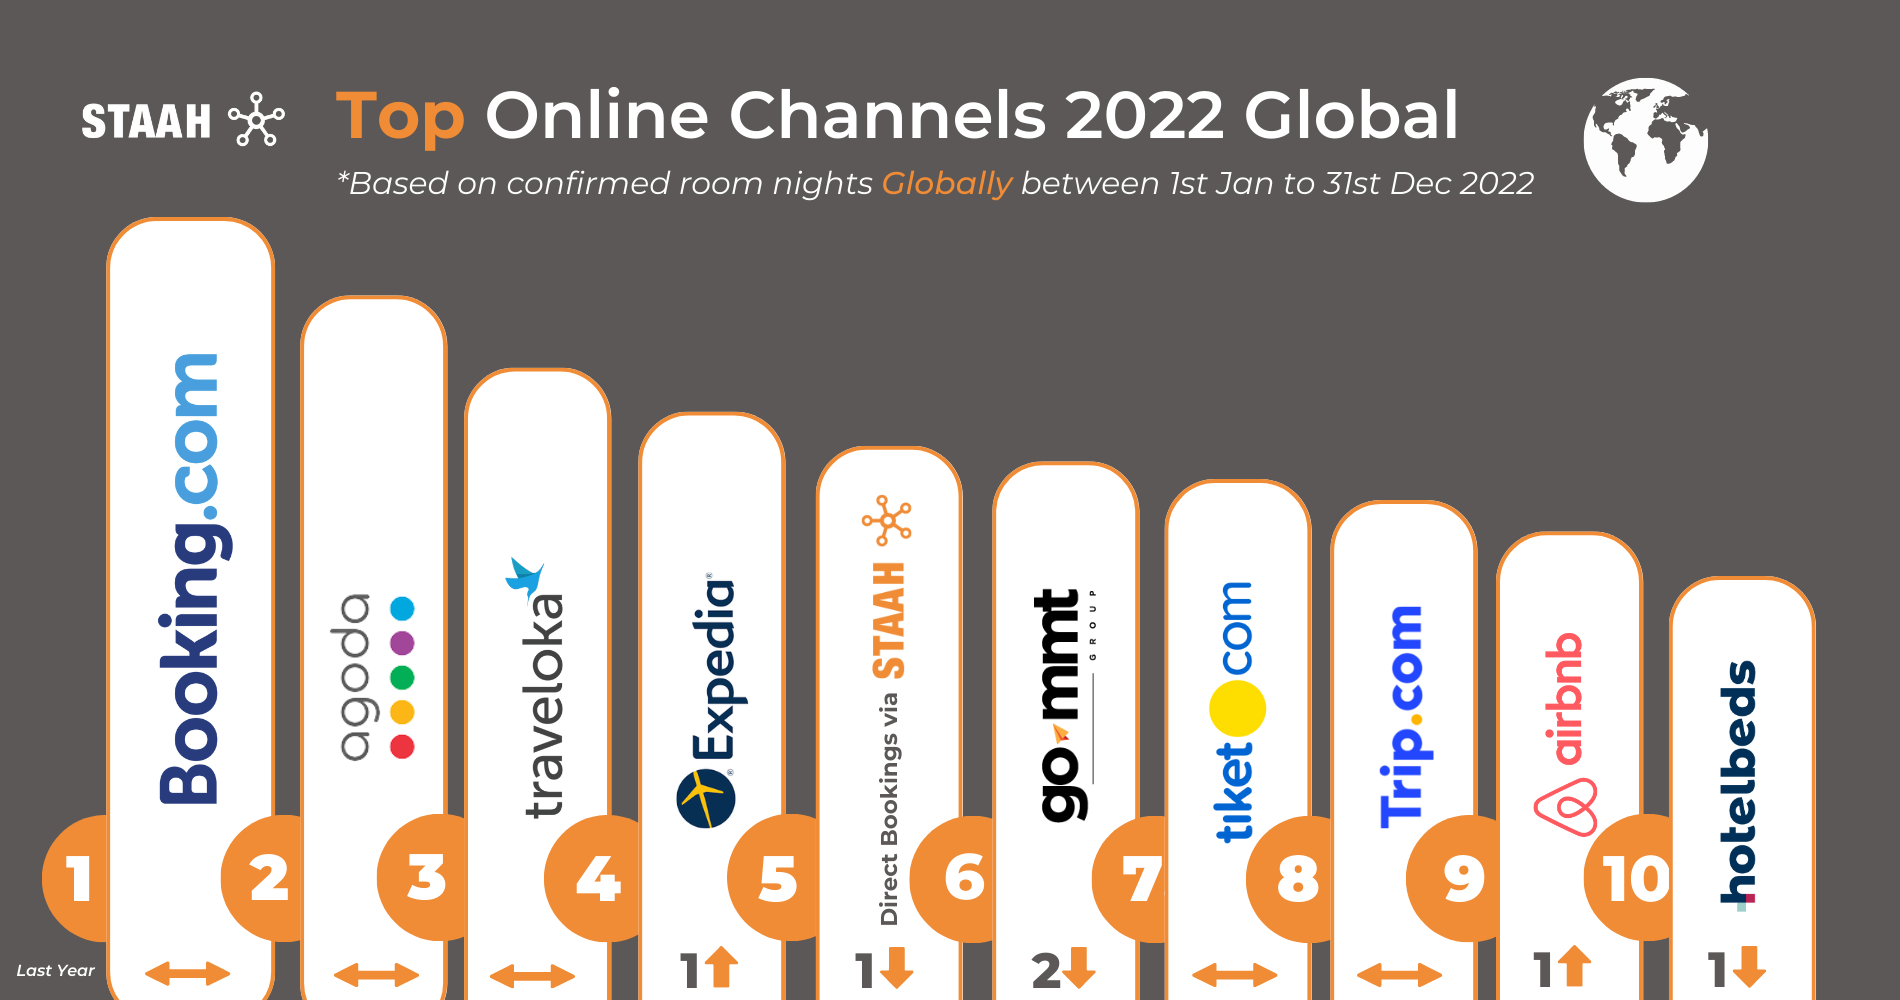 GoMMT, booking.com and Agoda were India’s top three online booking channels for 2022, says STAAH report